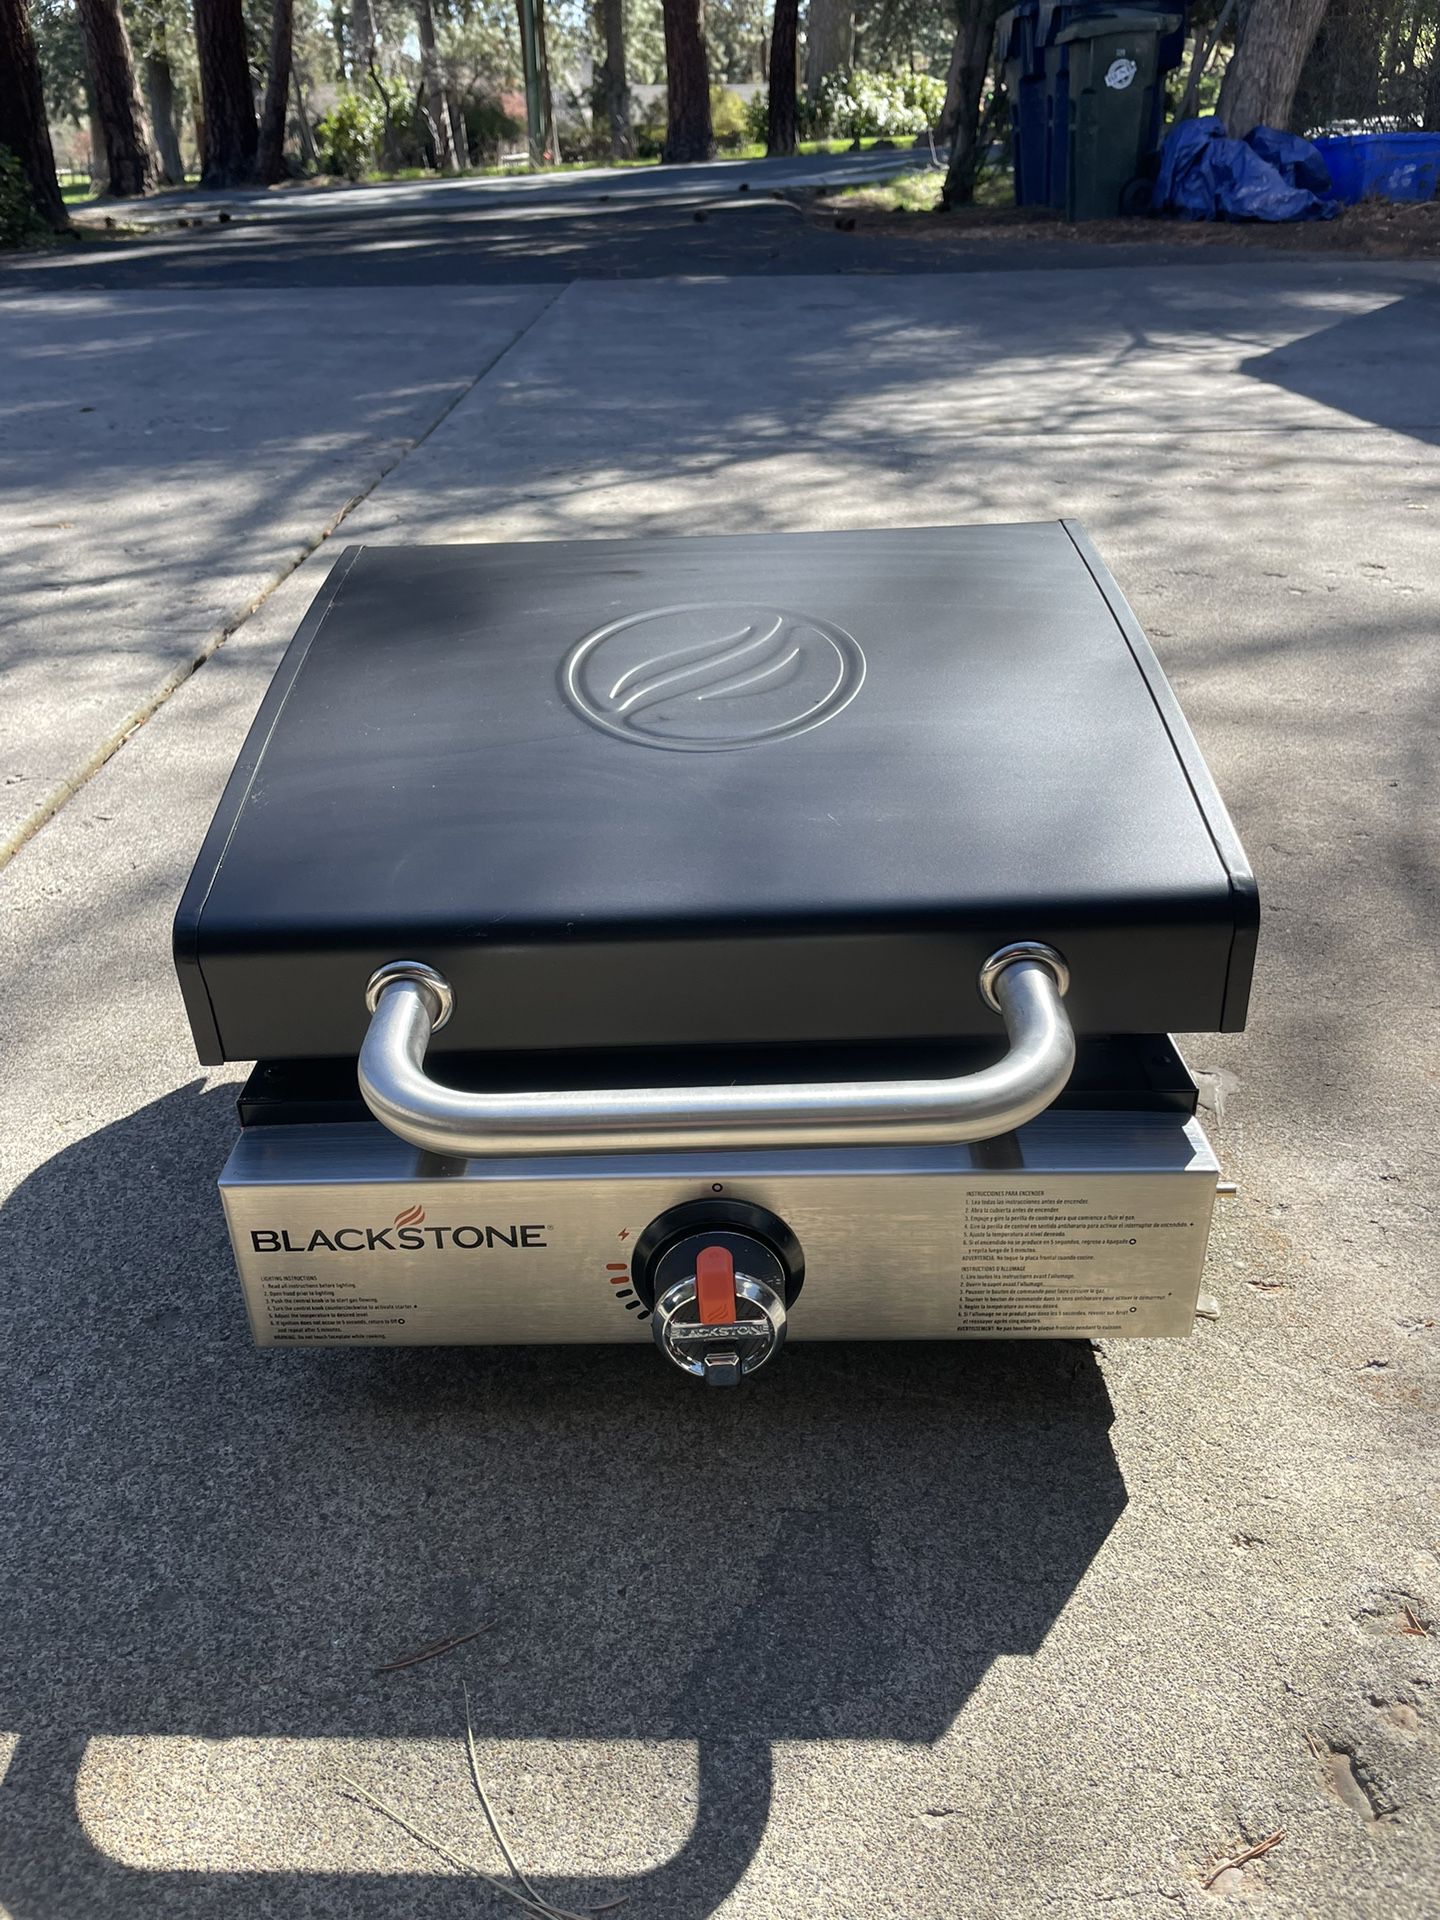 Black stone Camping Griddle